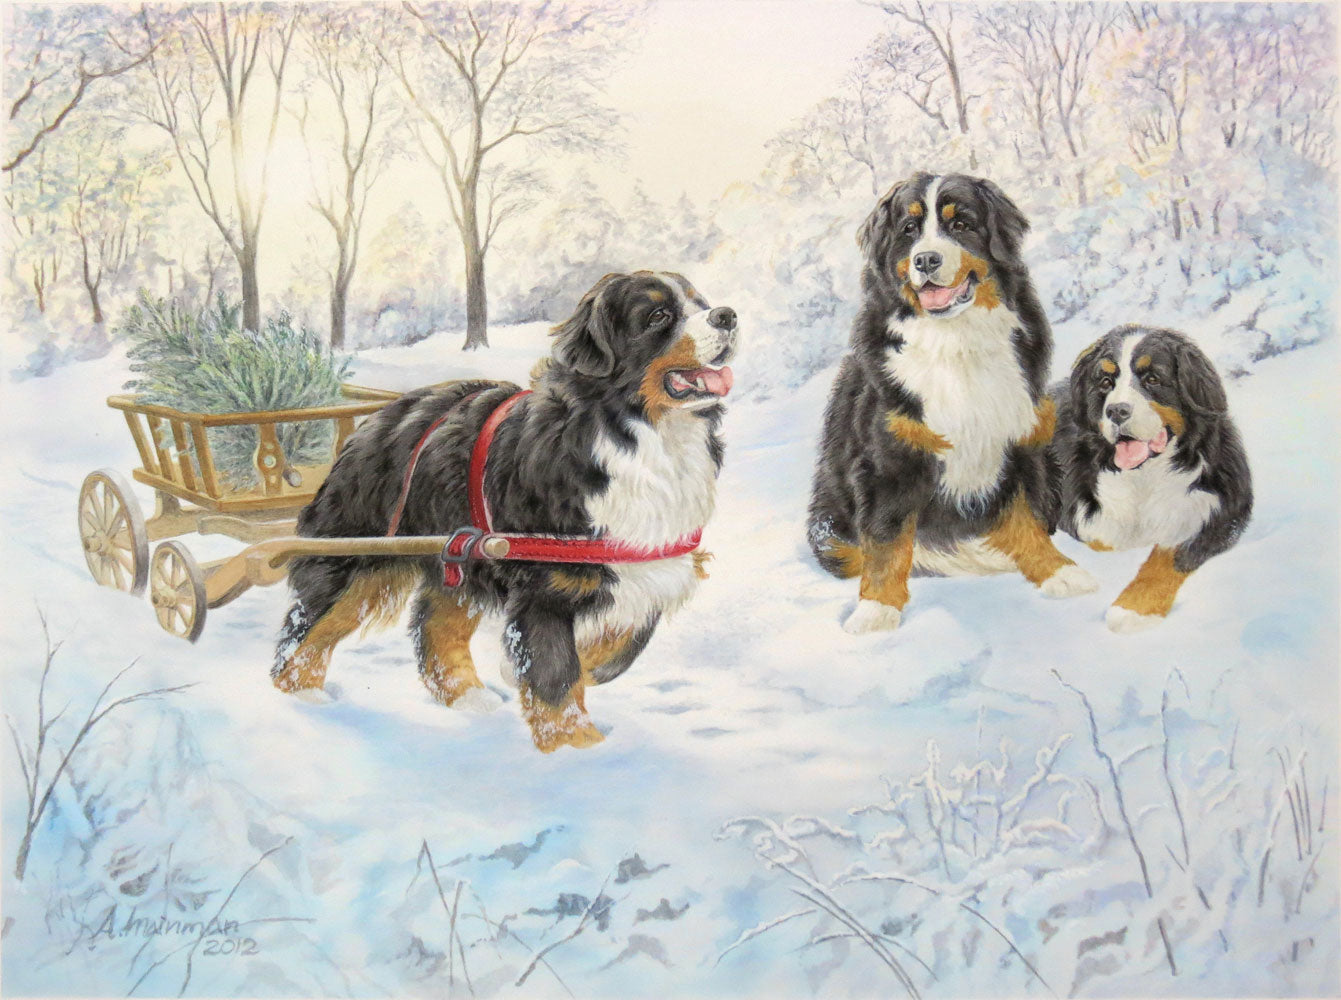 Berners in the snow - 672 piece puzzle